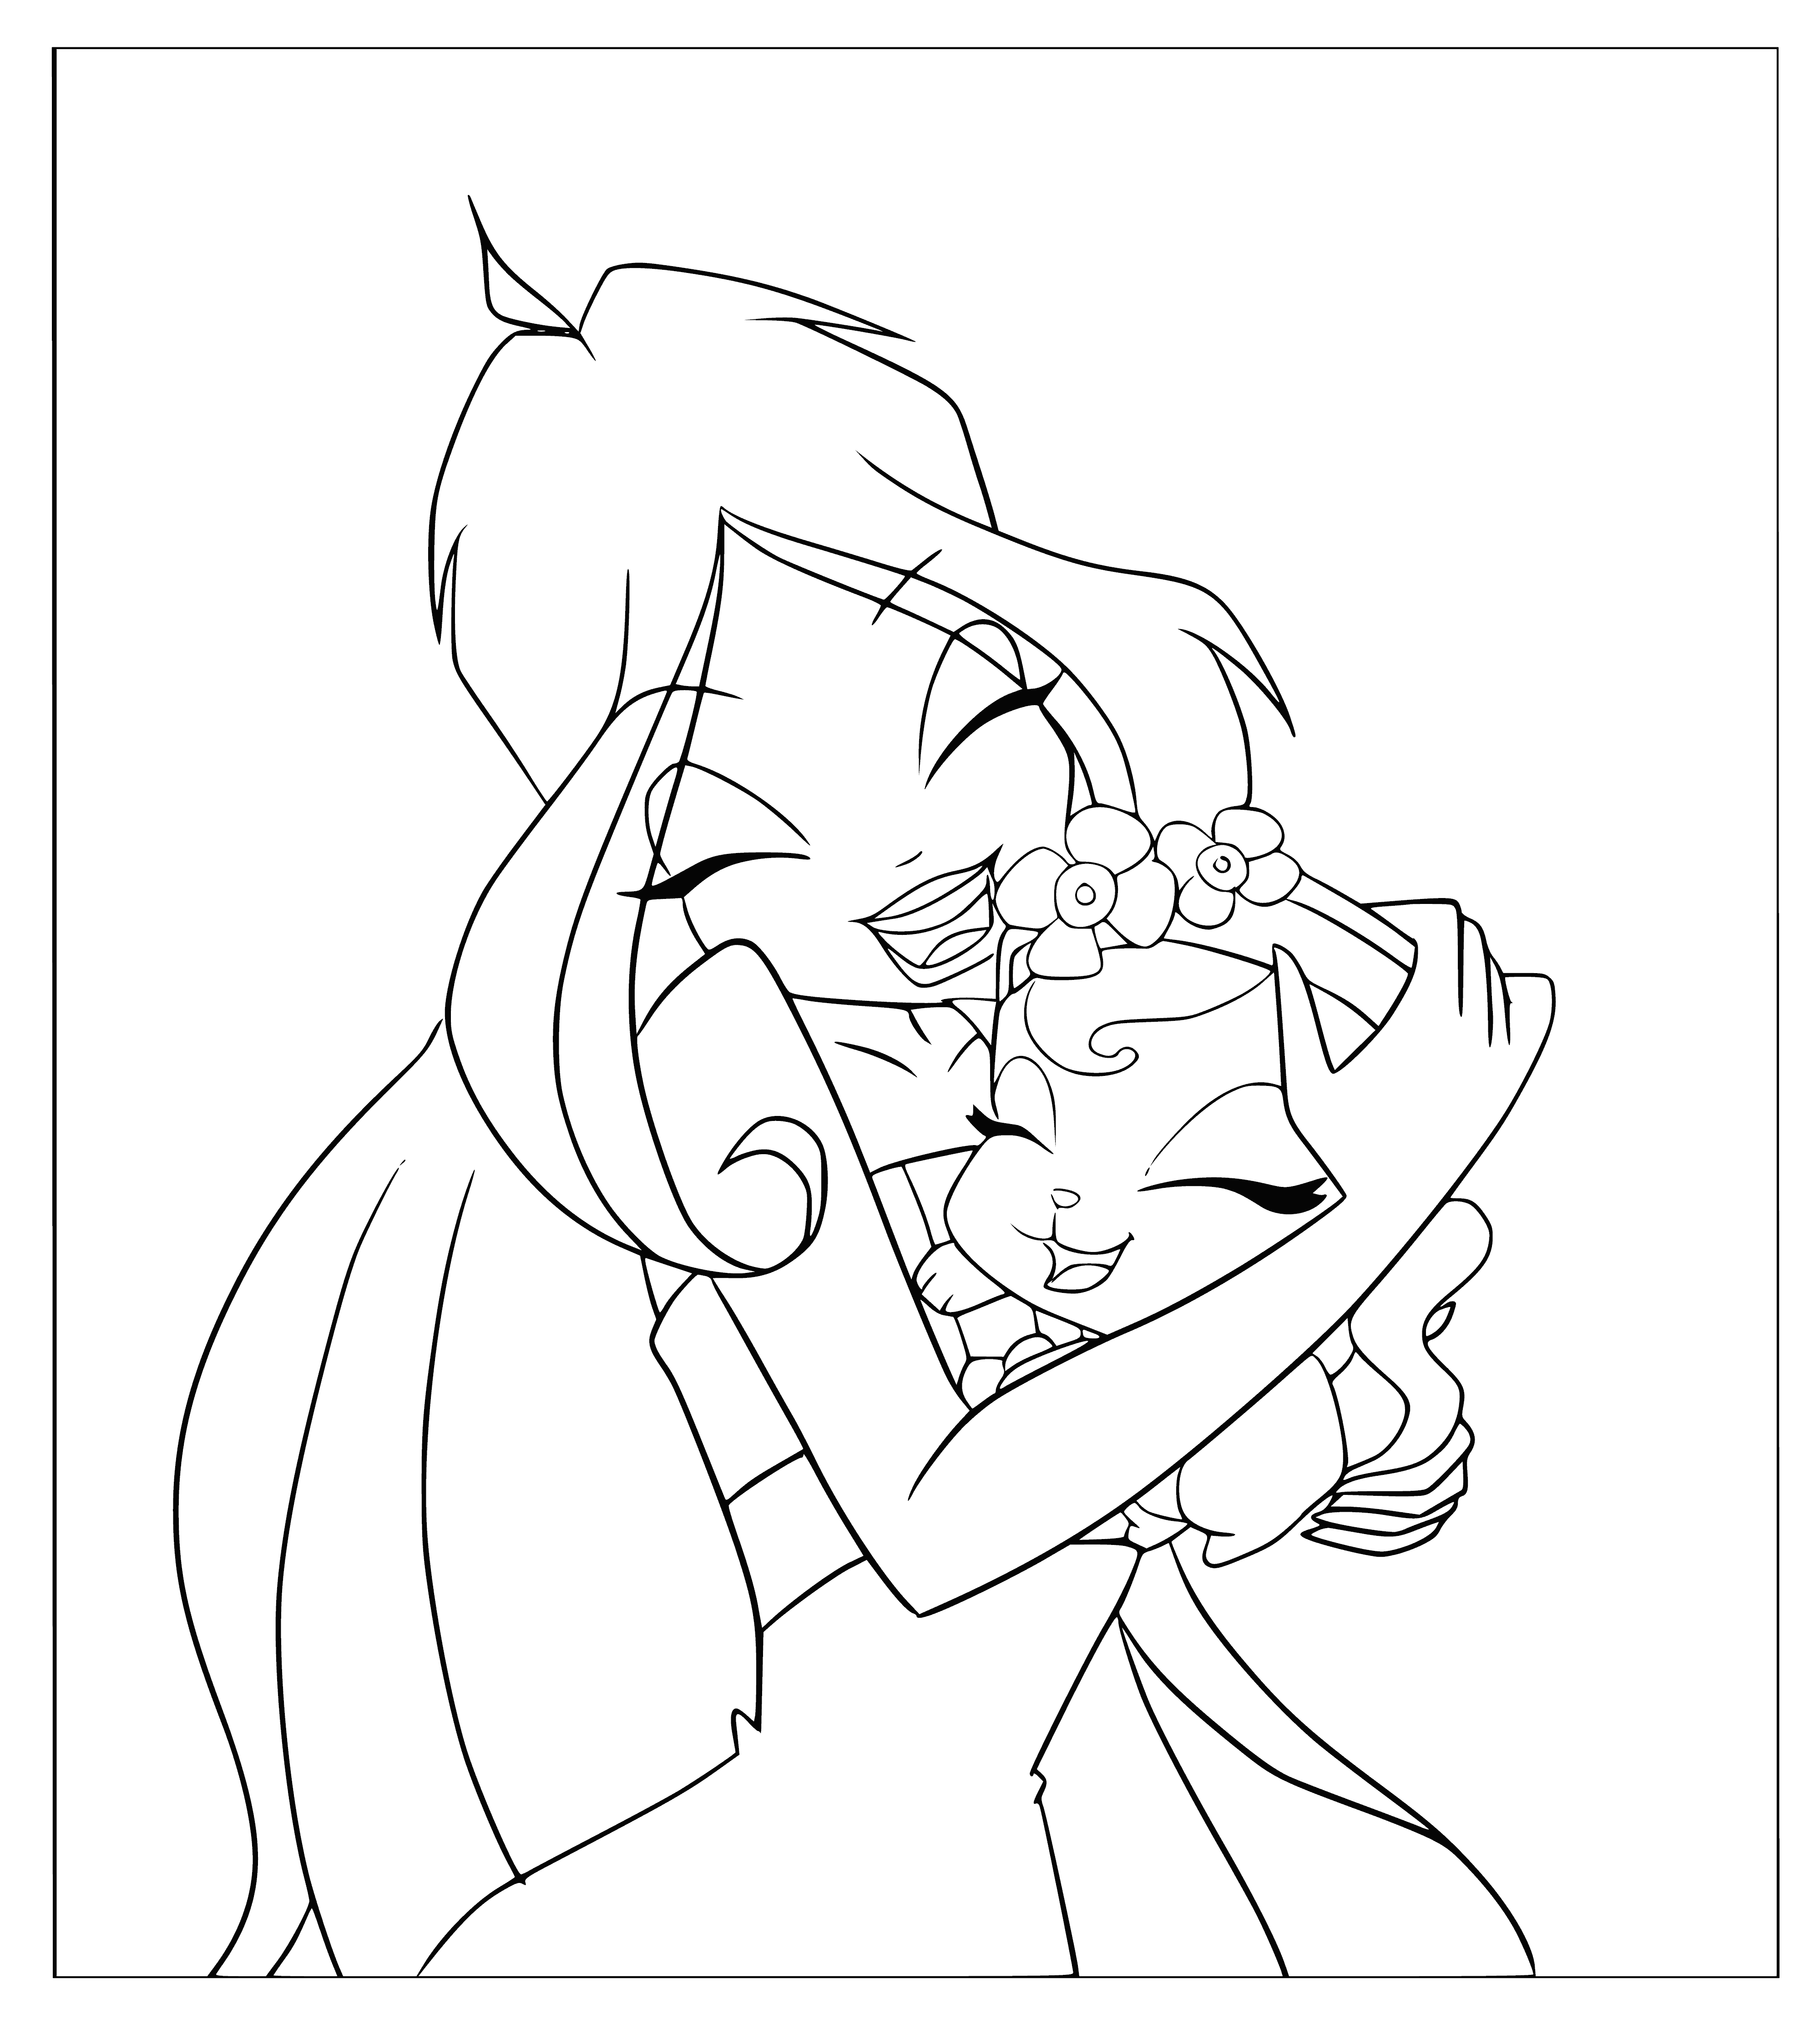 coloring page: Woman smiles, holding potted plant with healthy green leaves, talking to it as if it were alive.